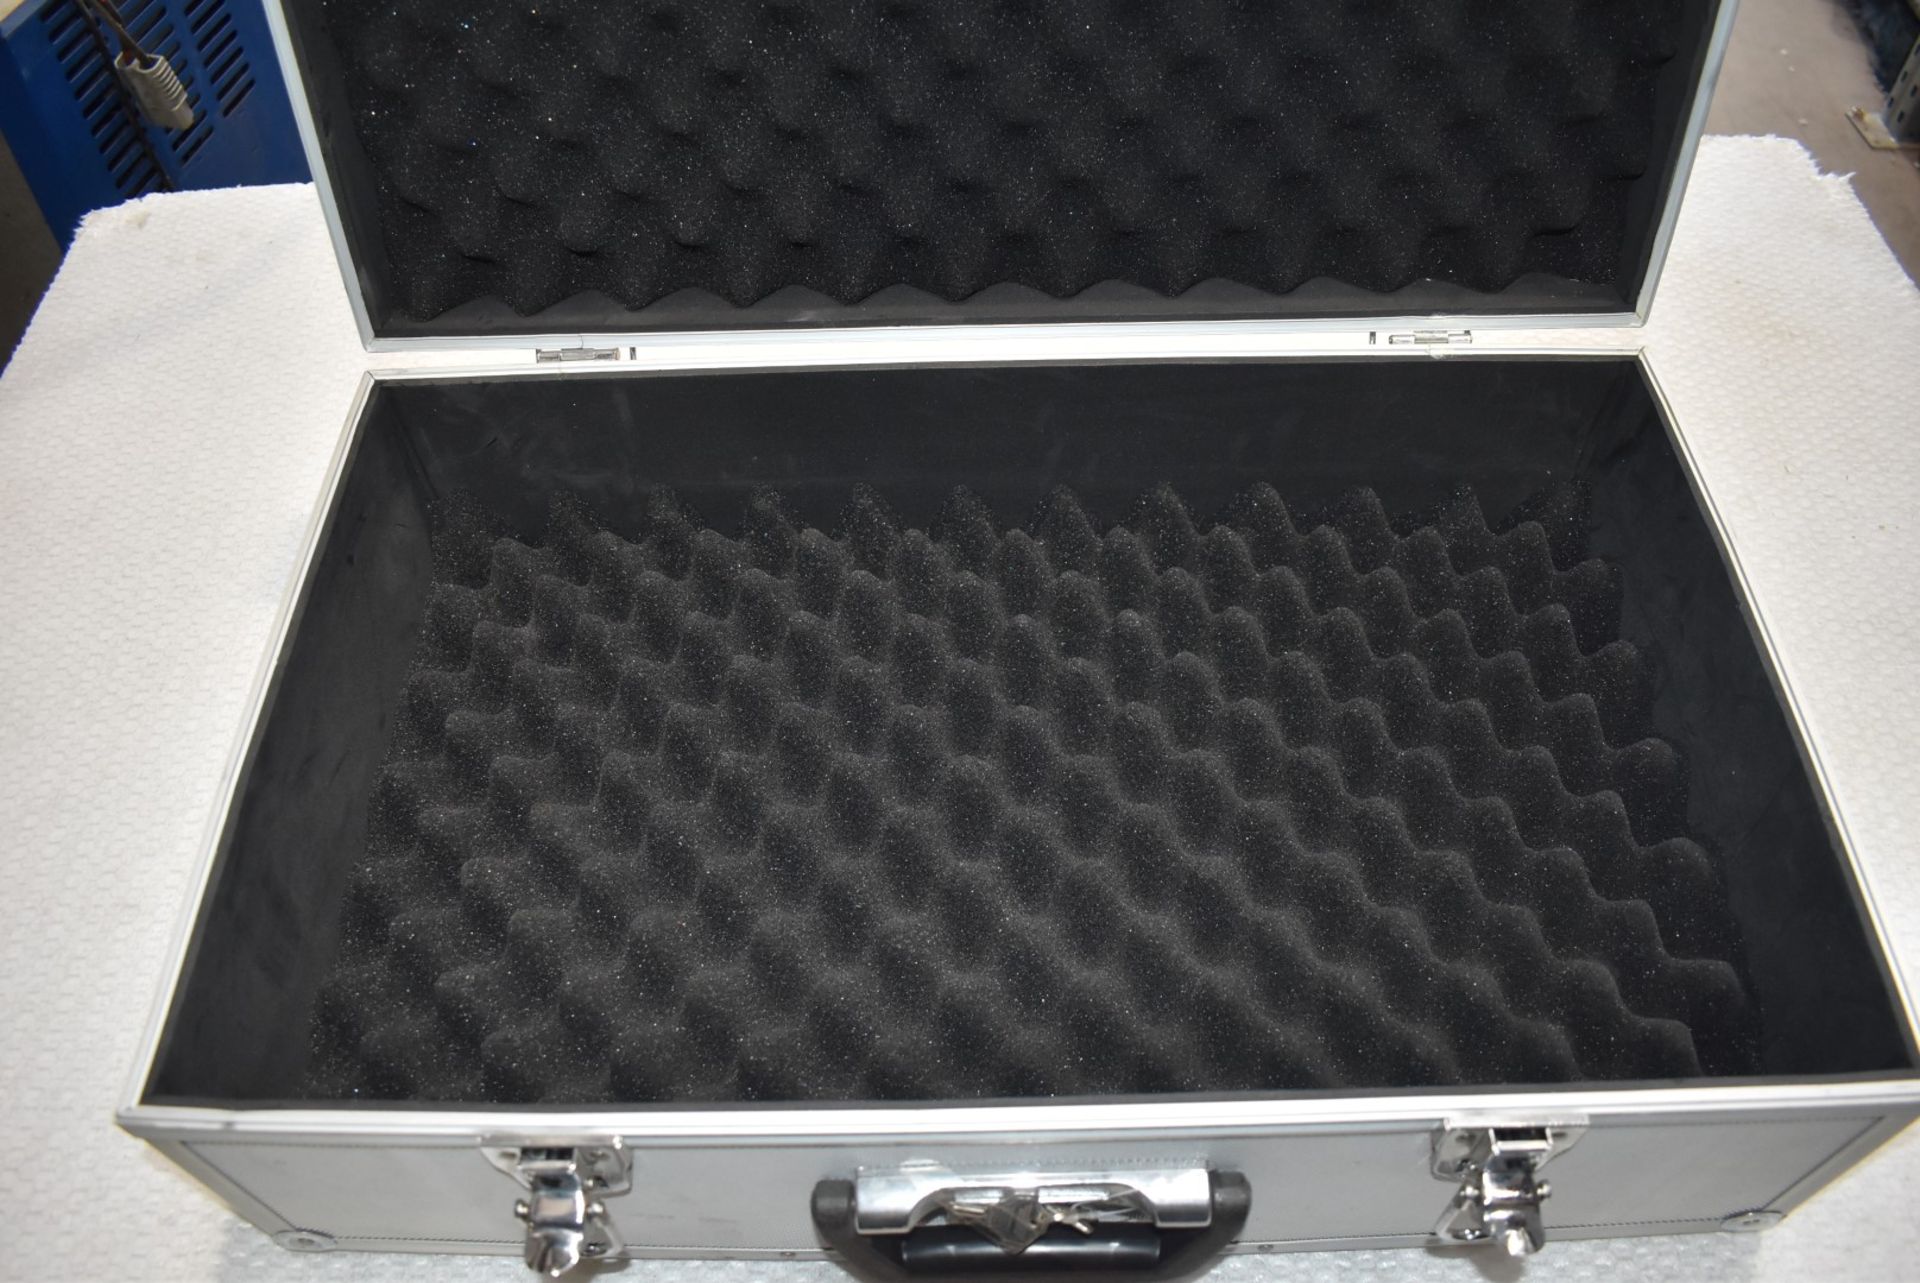 1 x Foam Padded Heavy Duty Transit Case - With Lock and Key - Size: 58 x 35 x 20 cms - Image 4 of 4